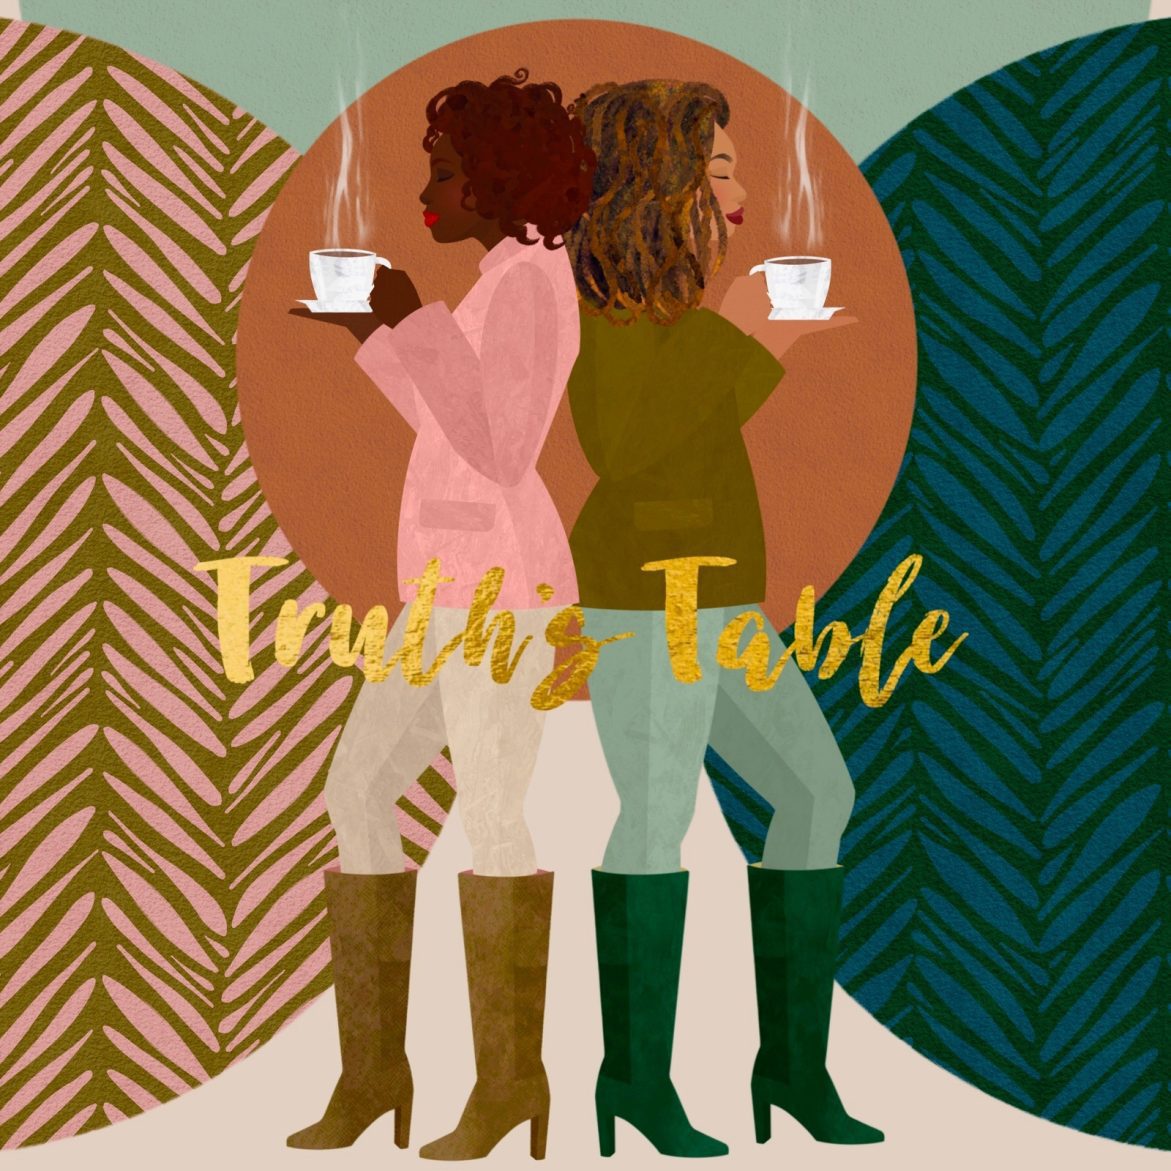 Black Podcasting - Truth’s Table Preaches: The Oil Won’t Run Out by Ekemini Uwan